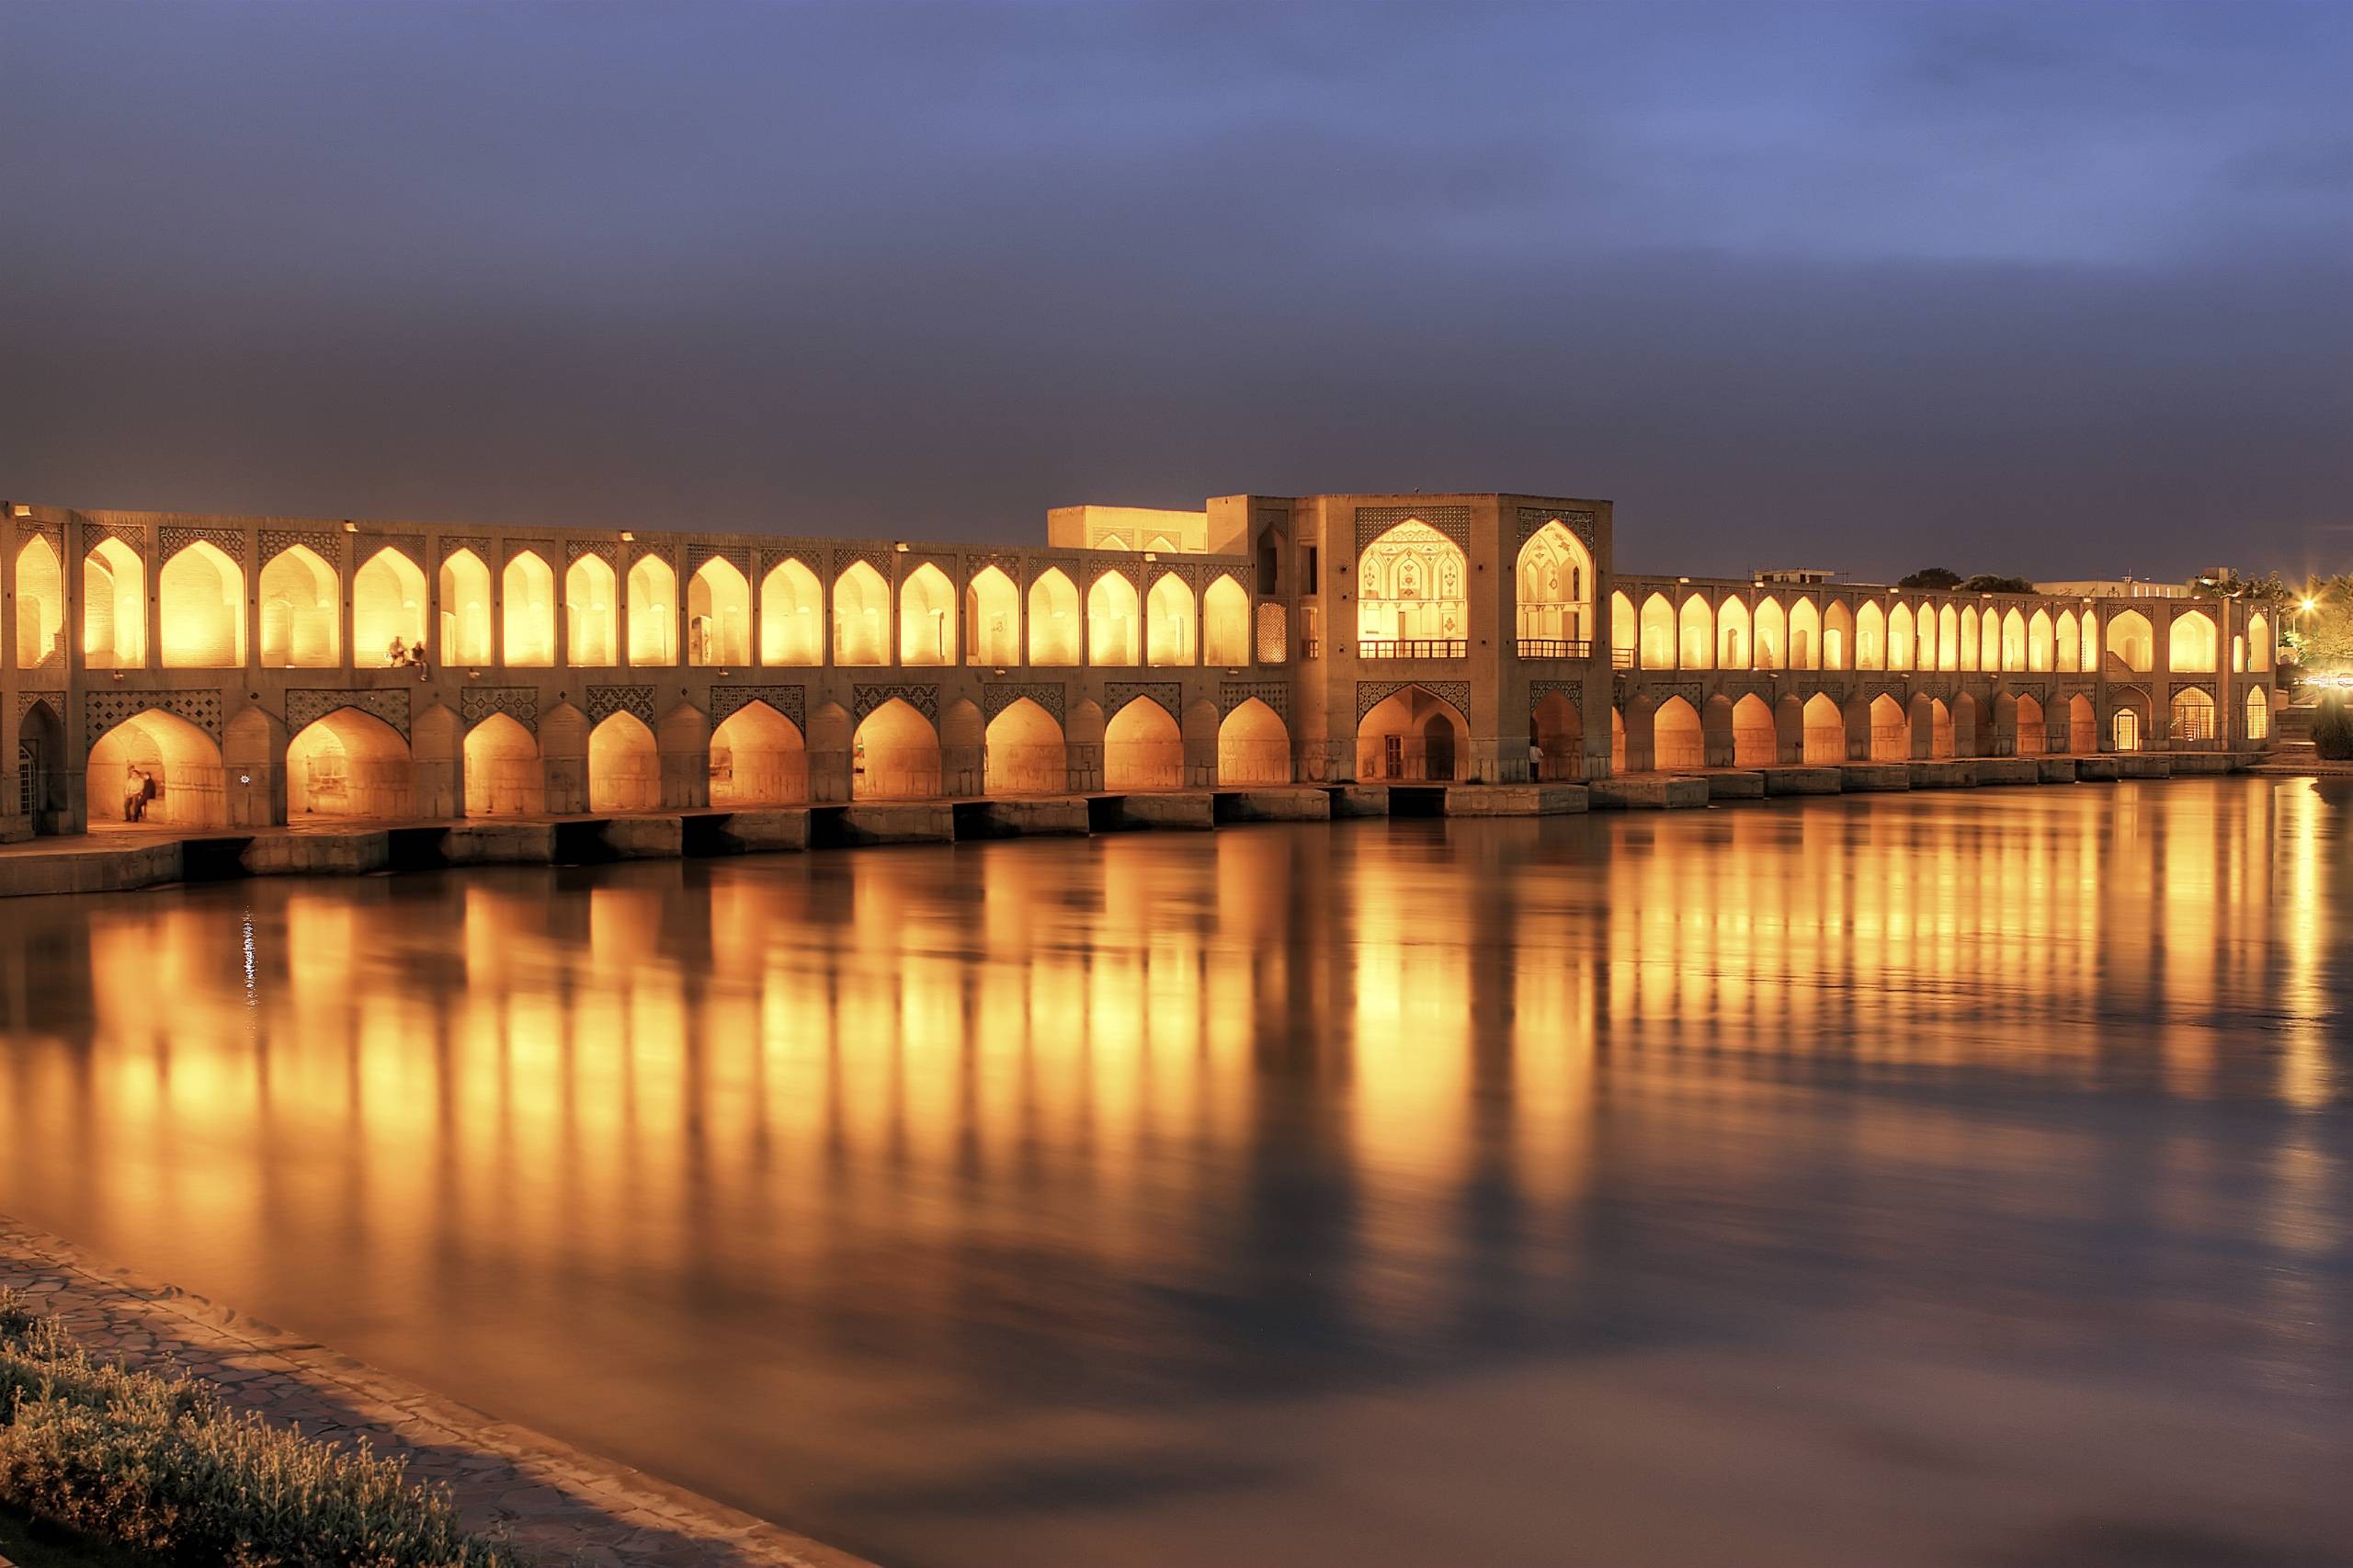 General 2560x1706 night Iran lights river photography architecture Islamic architecture